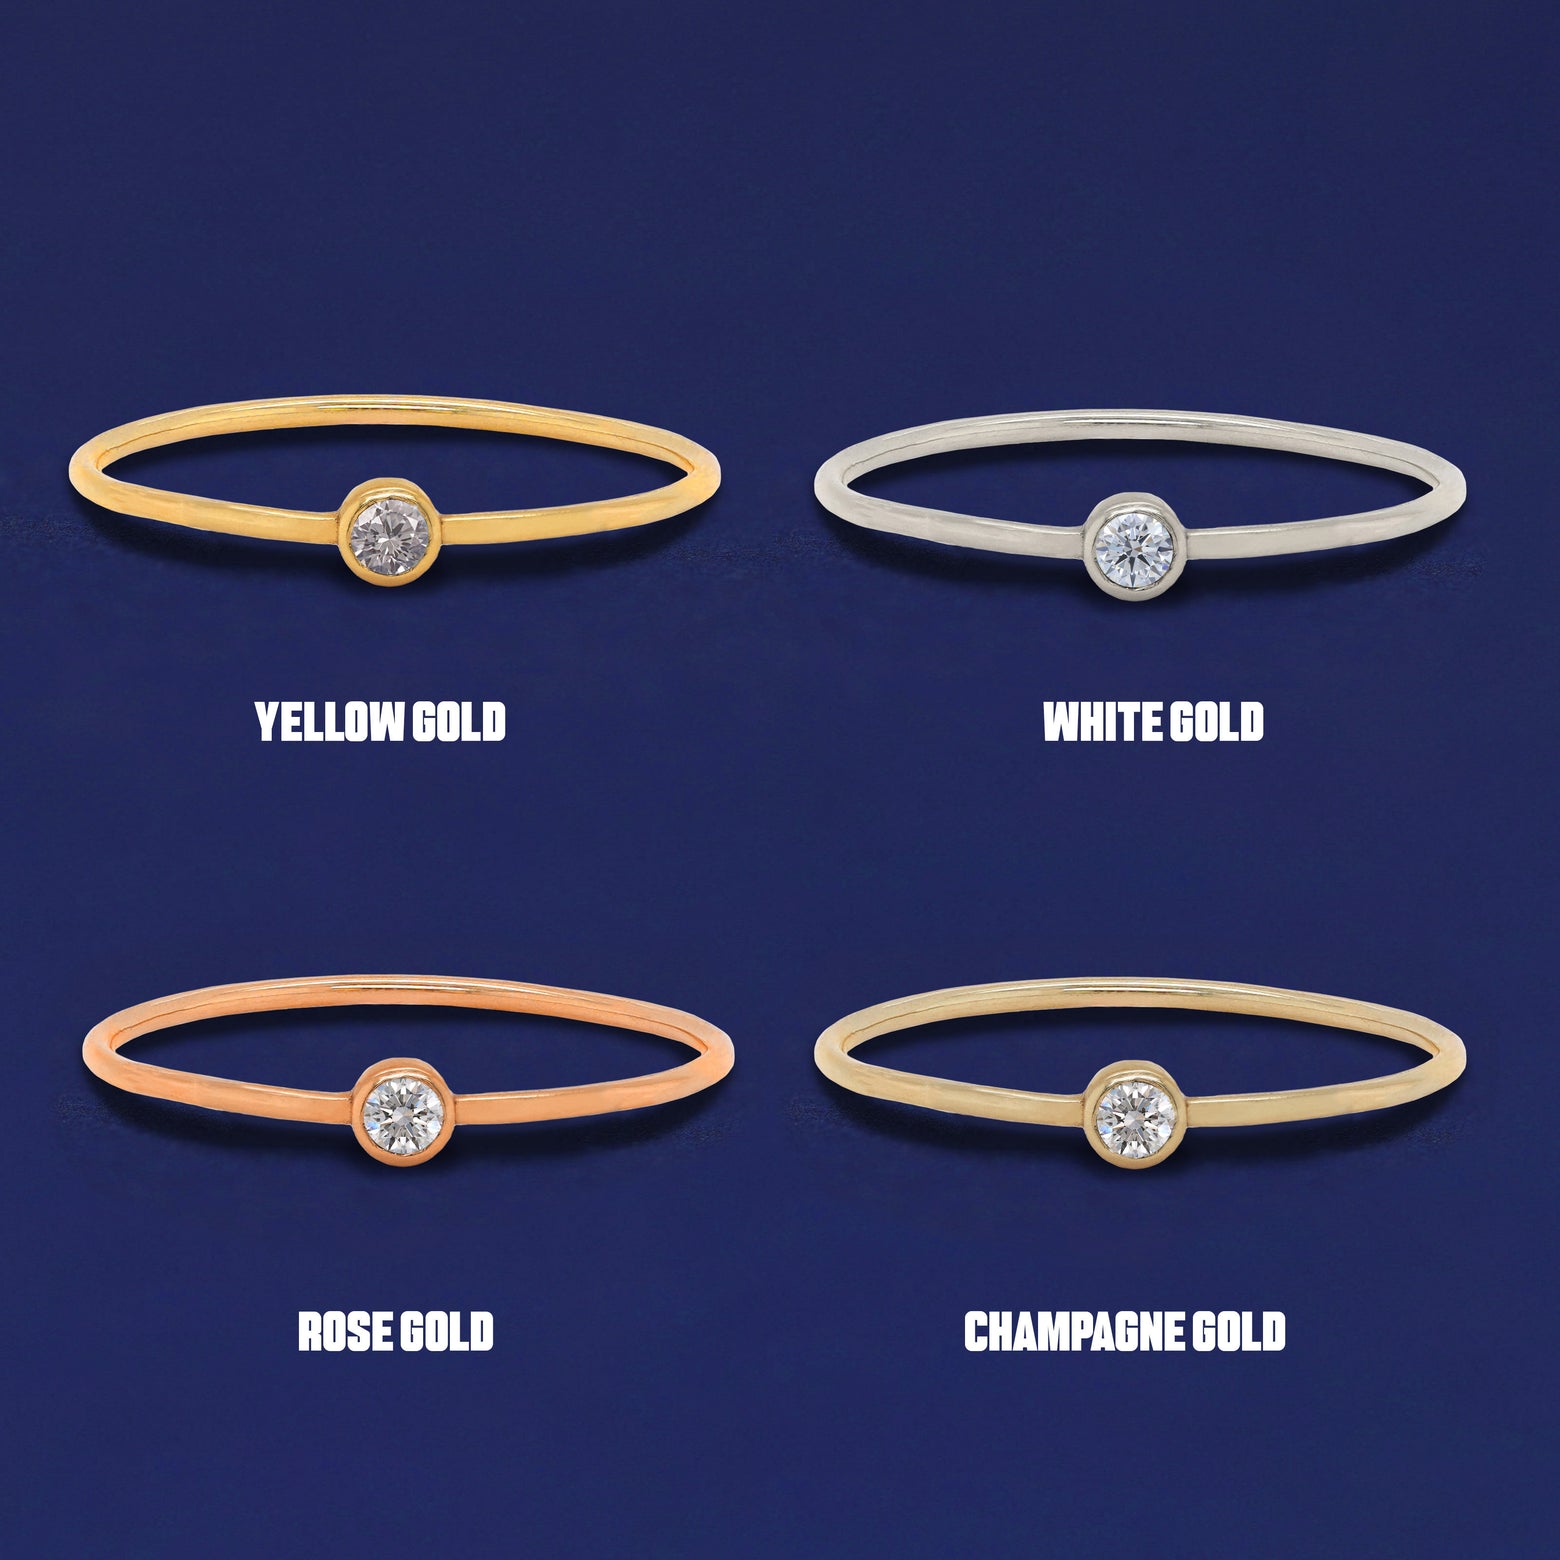 Four versions of the Diamond Ring shown in options of yellow, white, rose and champagne gold